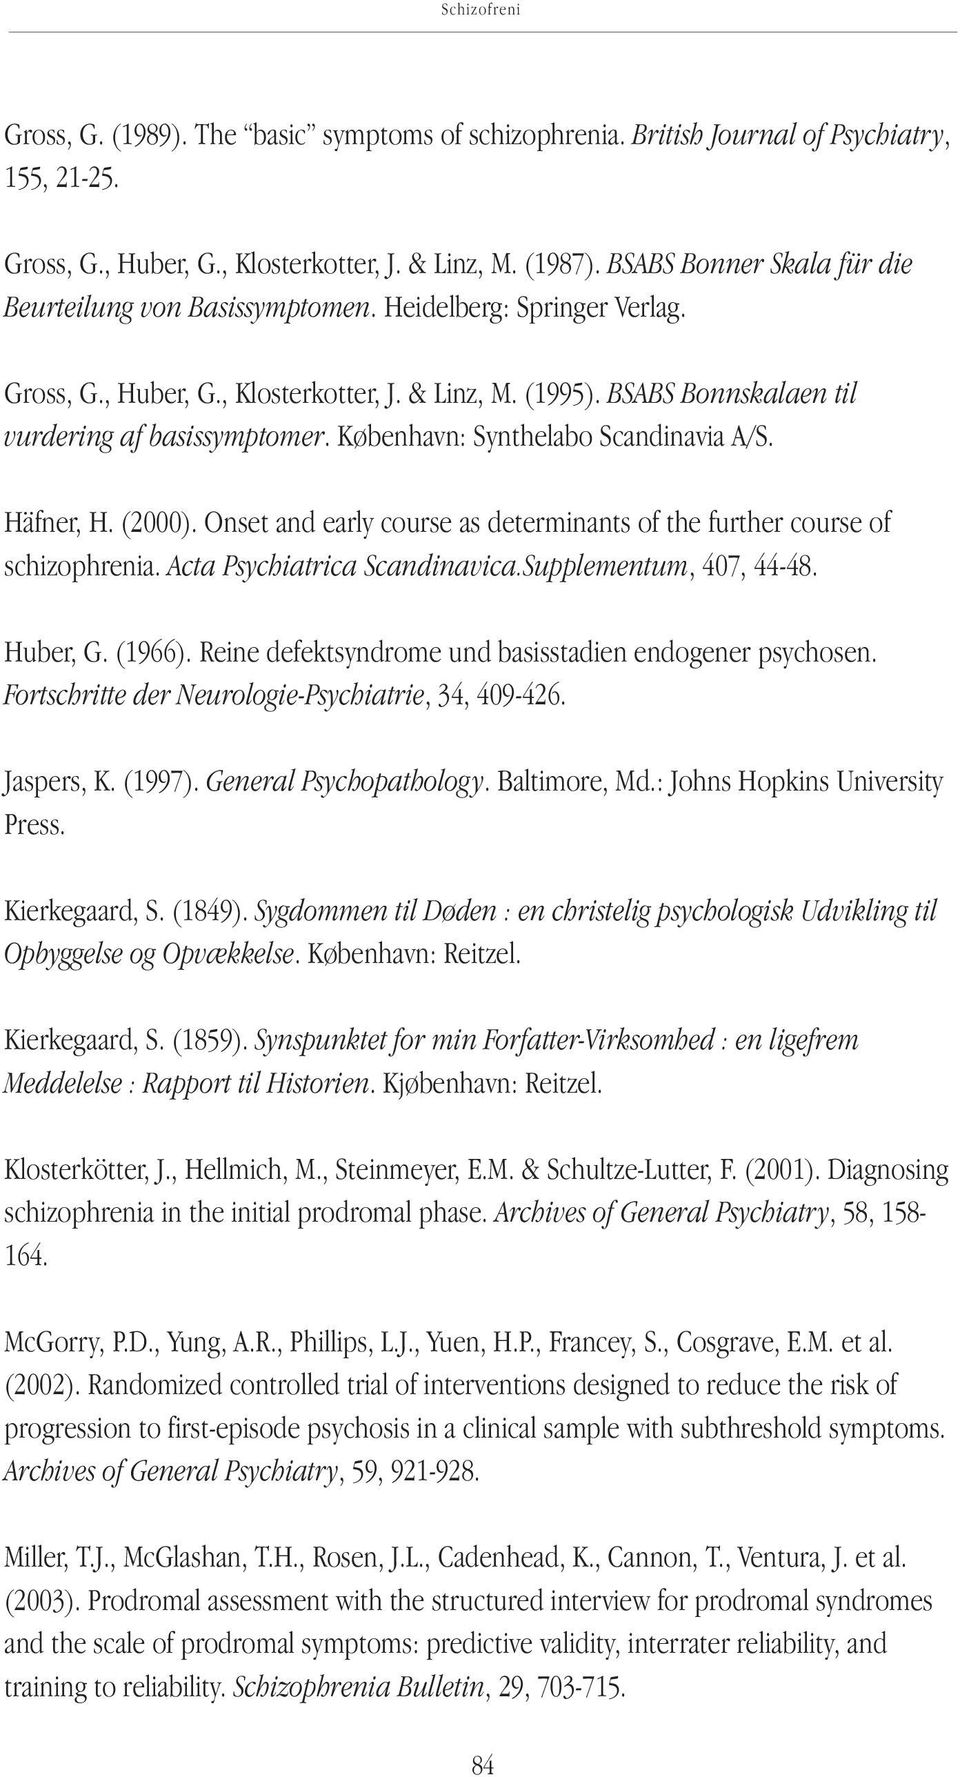 København: Synthelabo Scandinavia A/S. Häfner, H. (2000). Onset and early course as determinants of the further course of schizophrenia. Acta Psychiatrica Scandinavica.Supplementum, 407, 44-48.